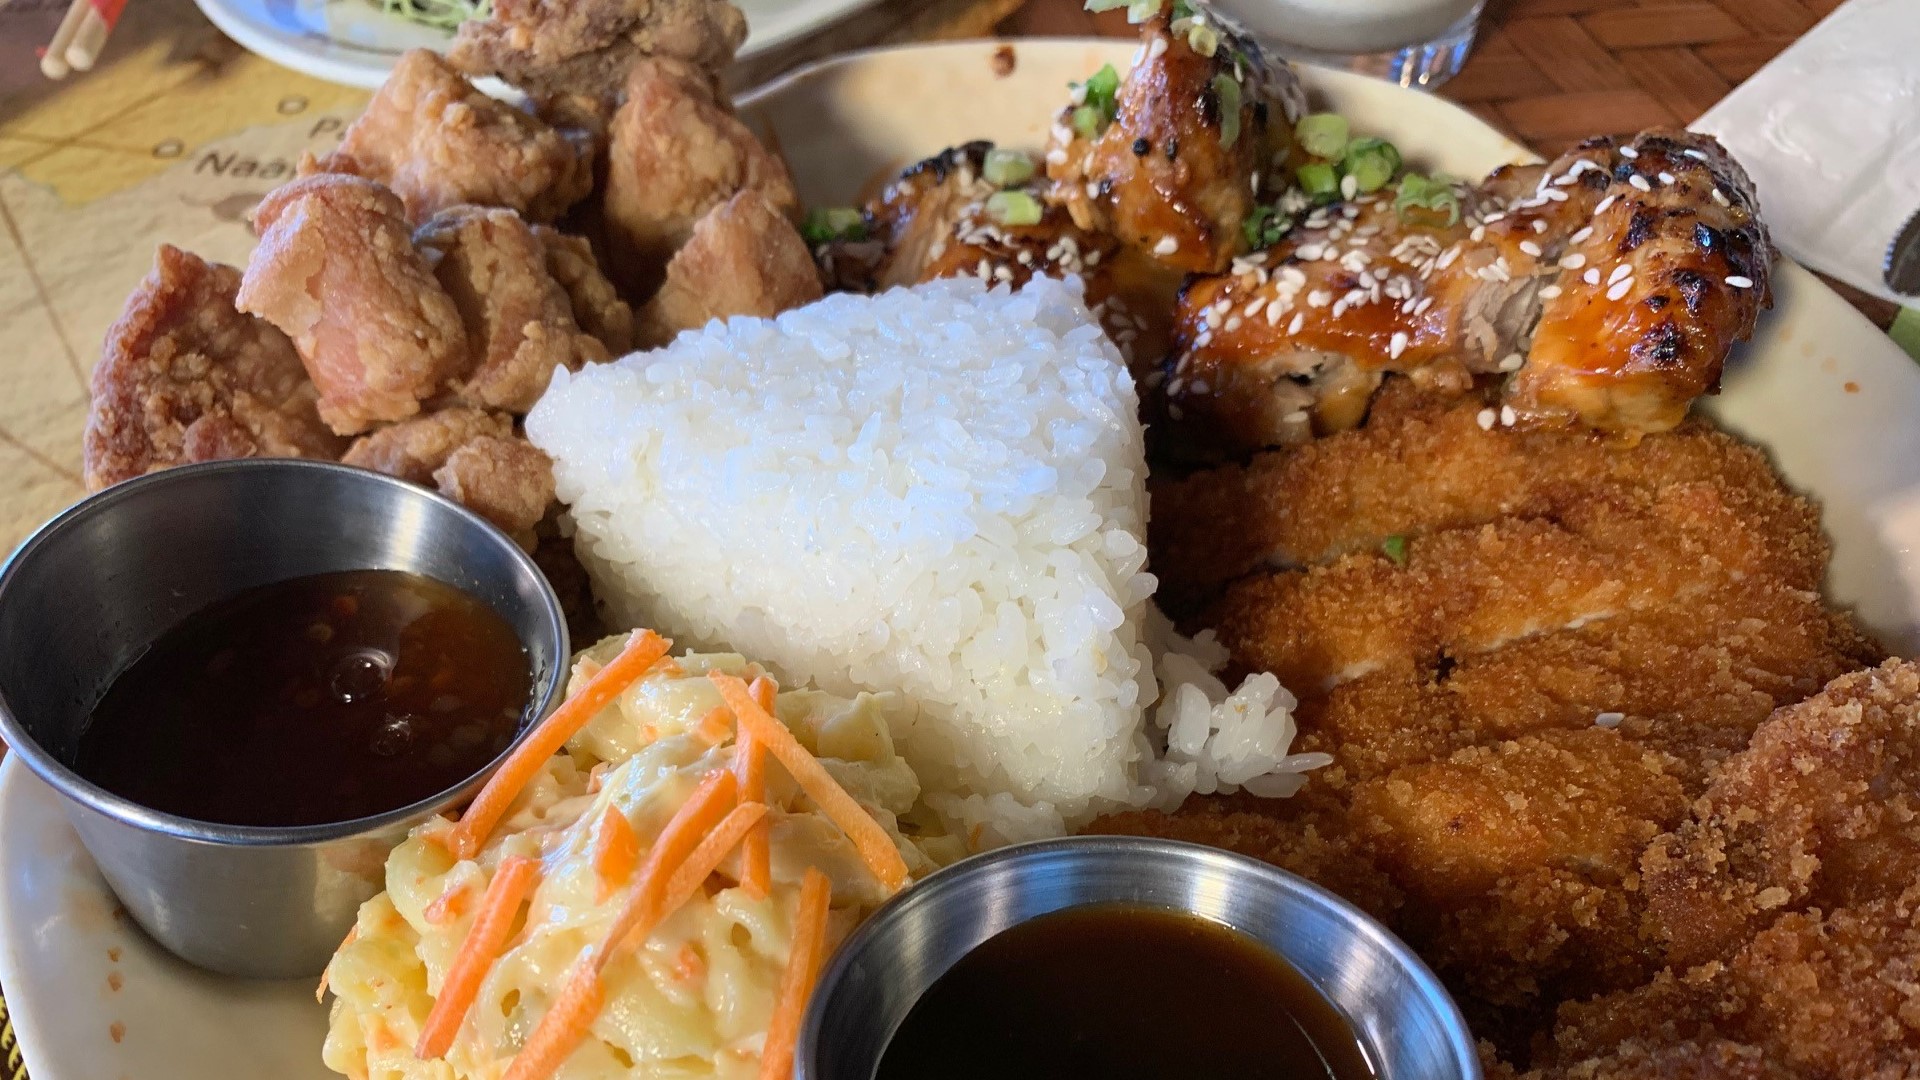 Pac Island Grill has been serving Hawaiian delights since 2005- it's a family-owned and operated spot that's sure to please.